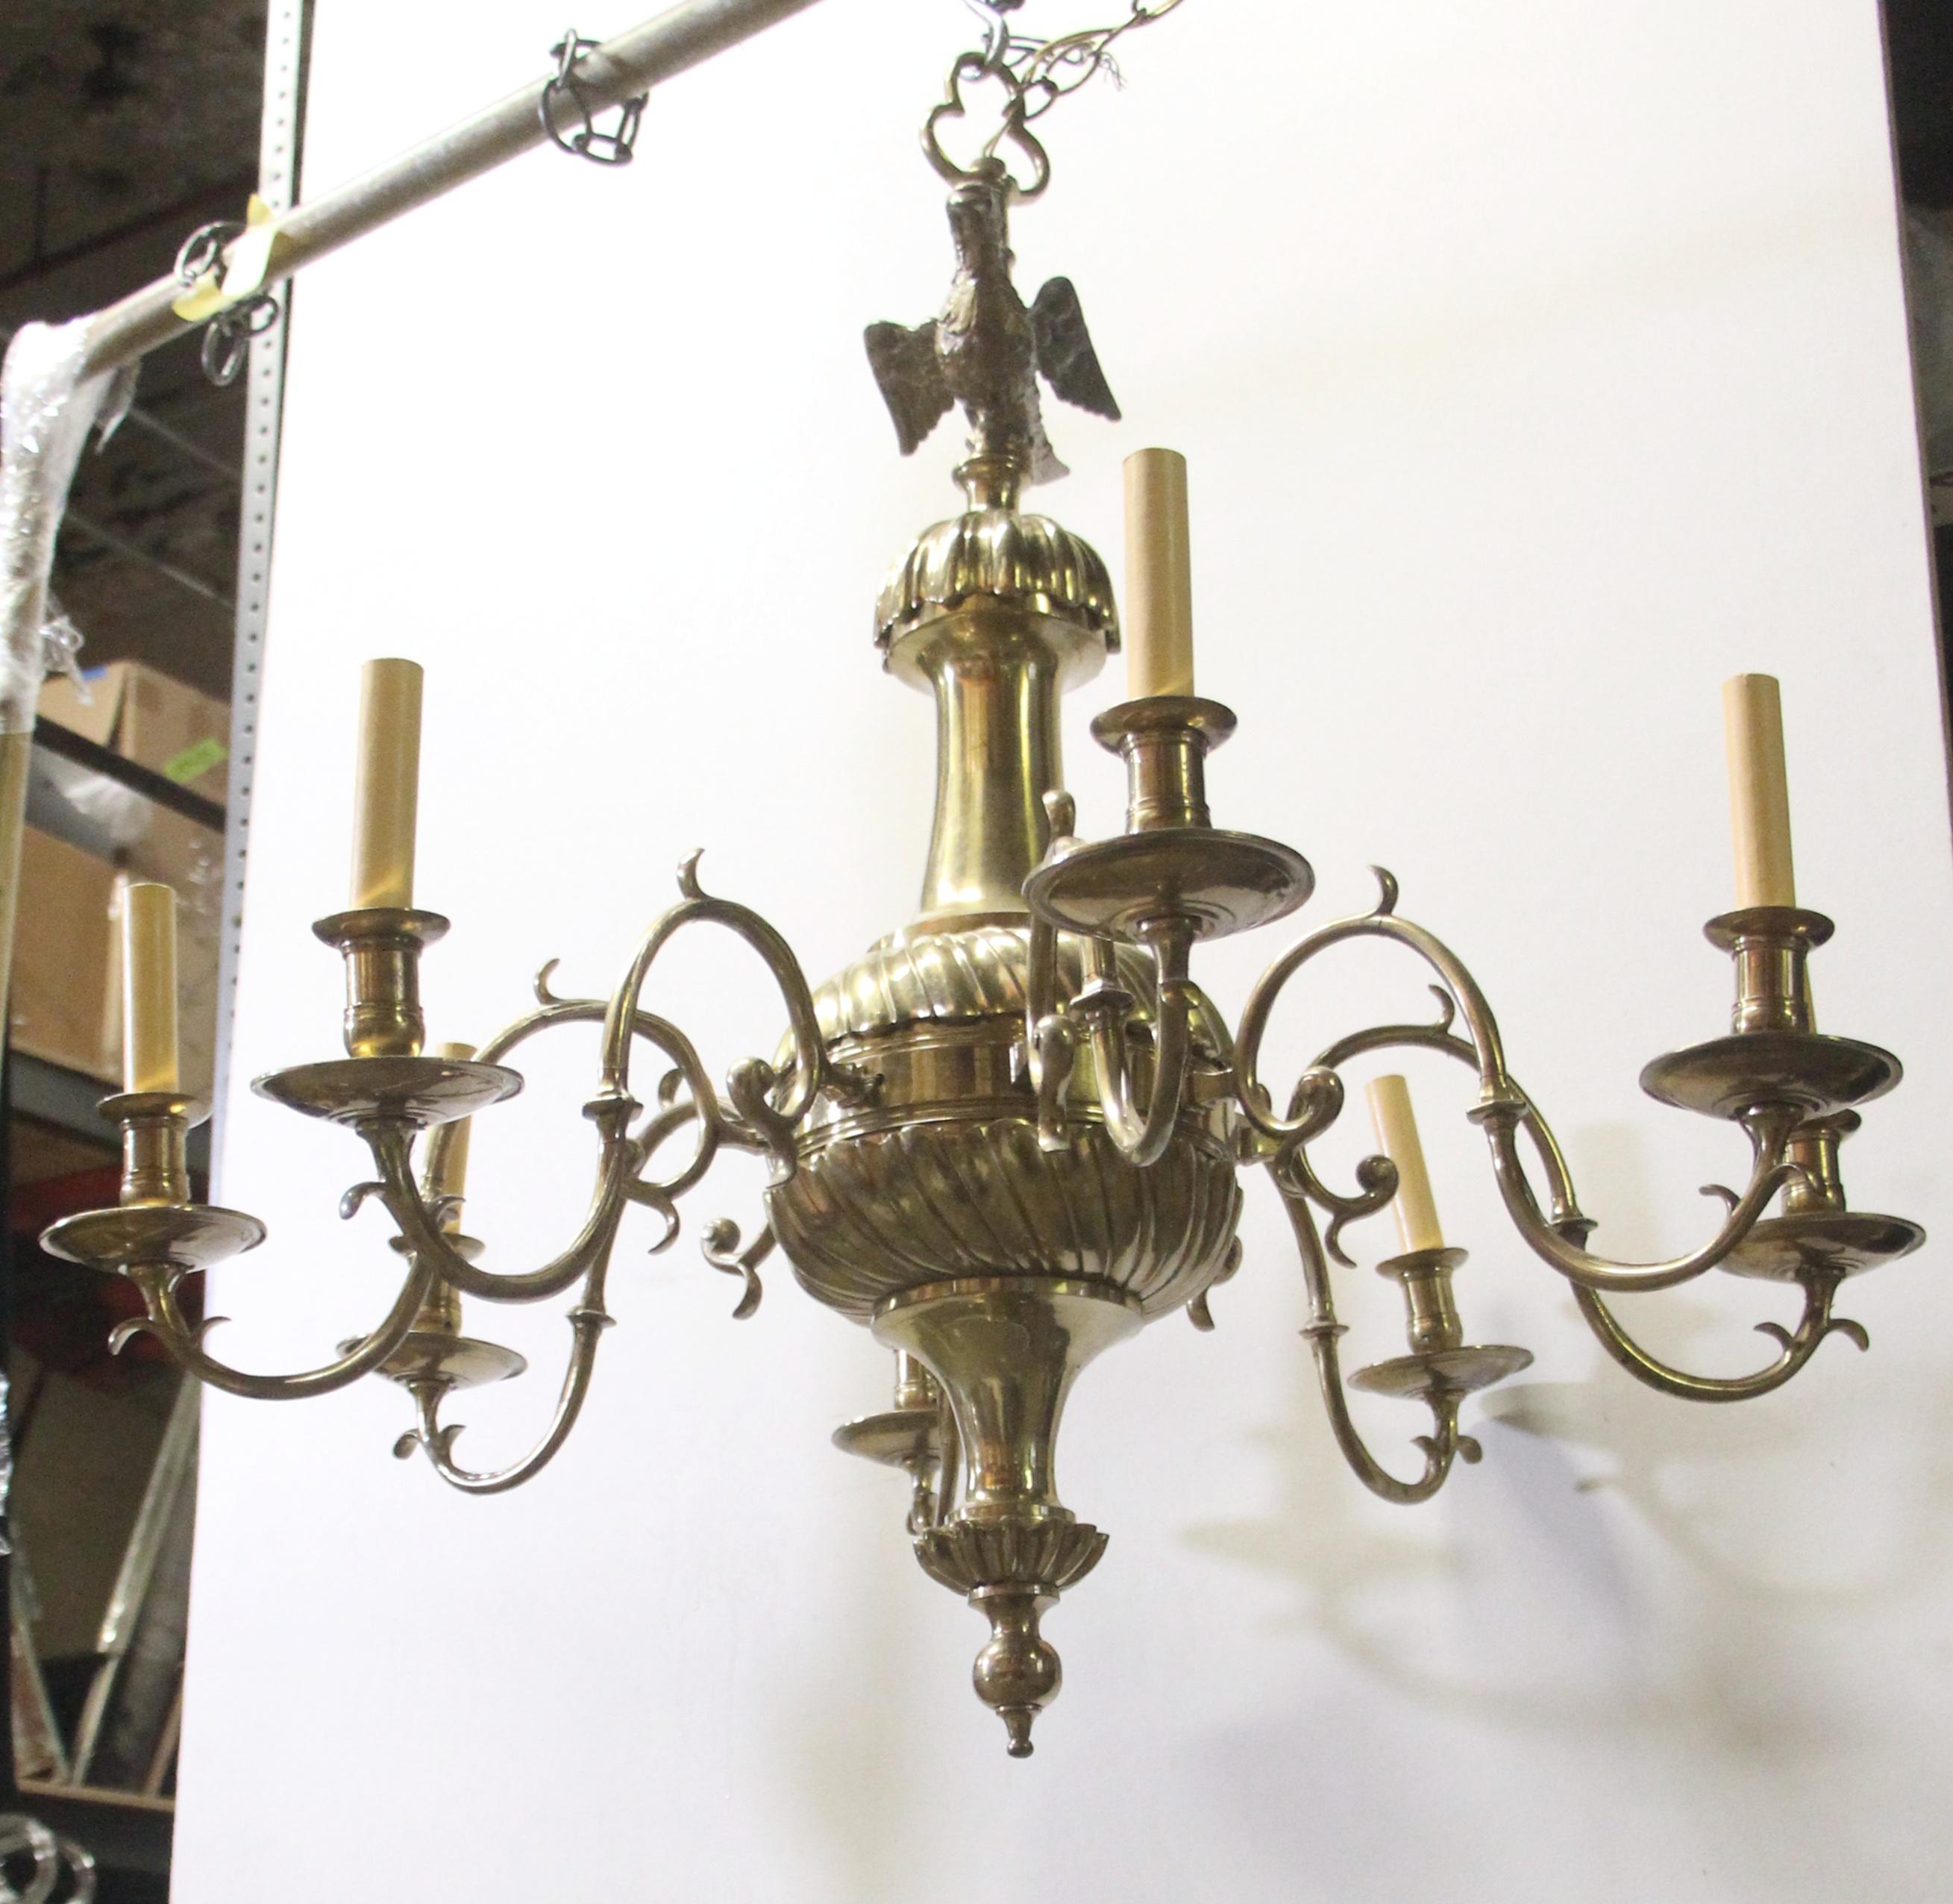 Colonial Revival Early 1900s Brass 8-Arm Chandelier from NYC Stock Exchange w/ Eagle Finial